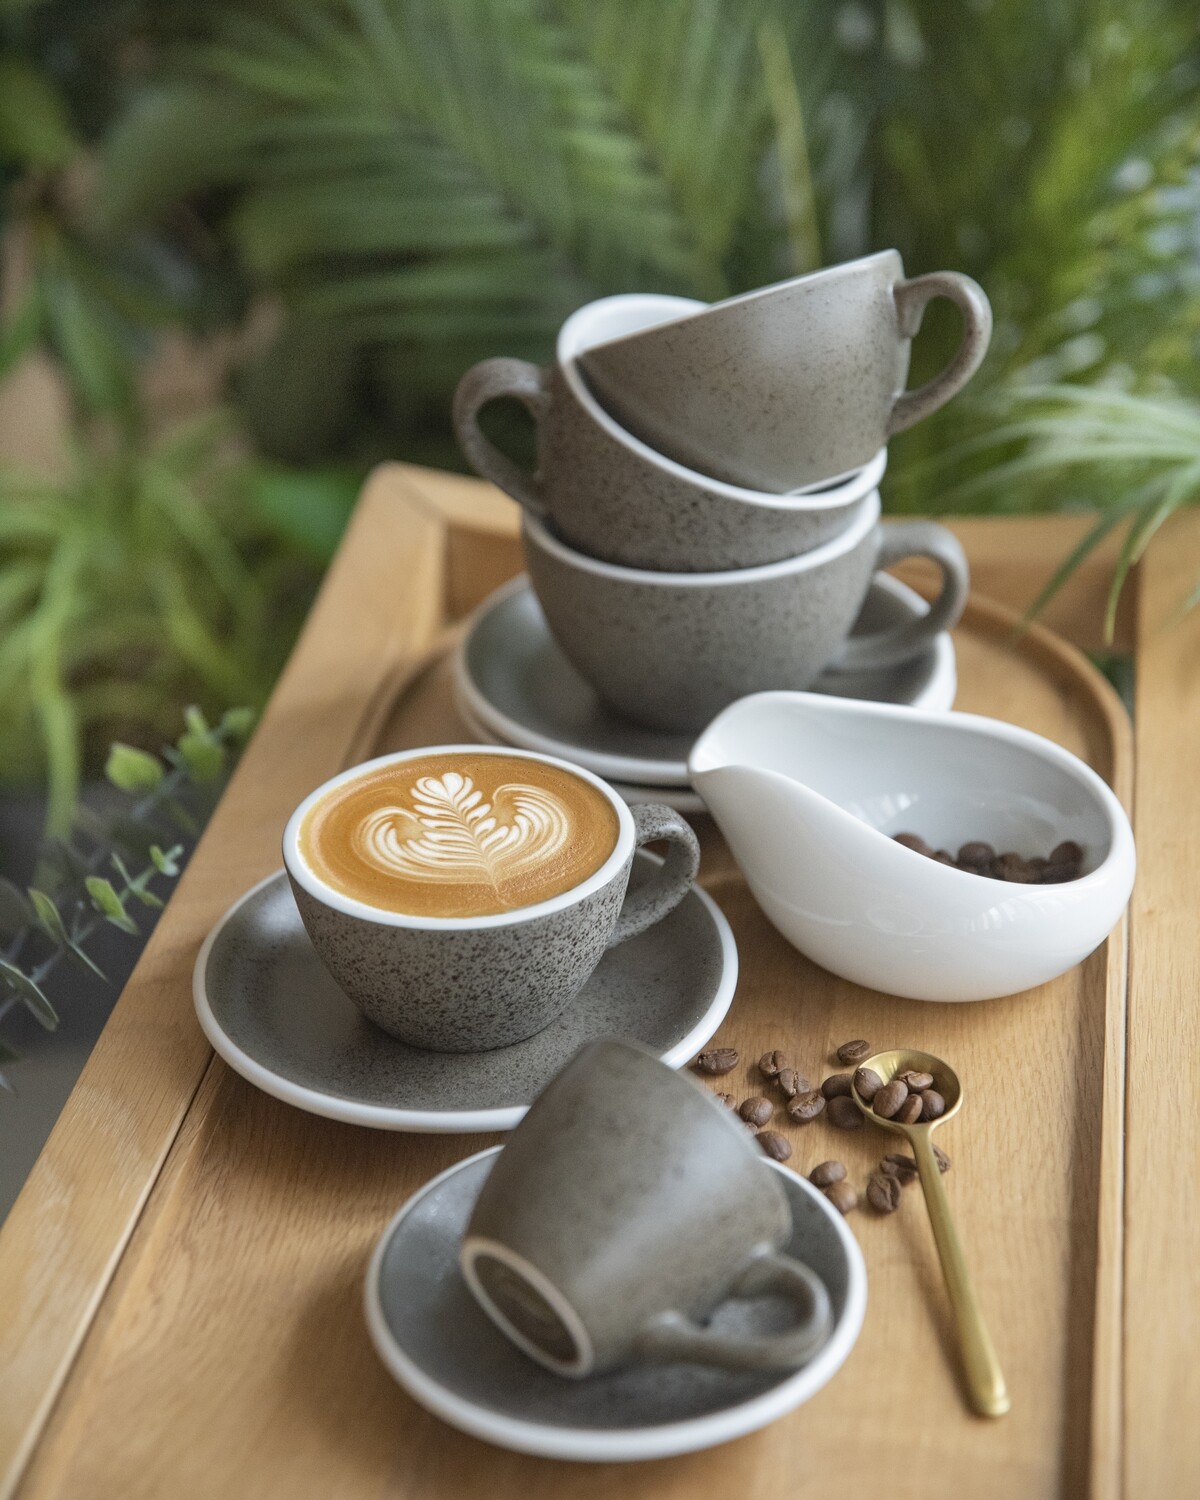 Loveramics 80ml / 3oz Egg Coffee Cup in potters colours